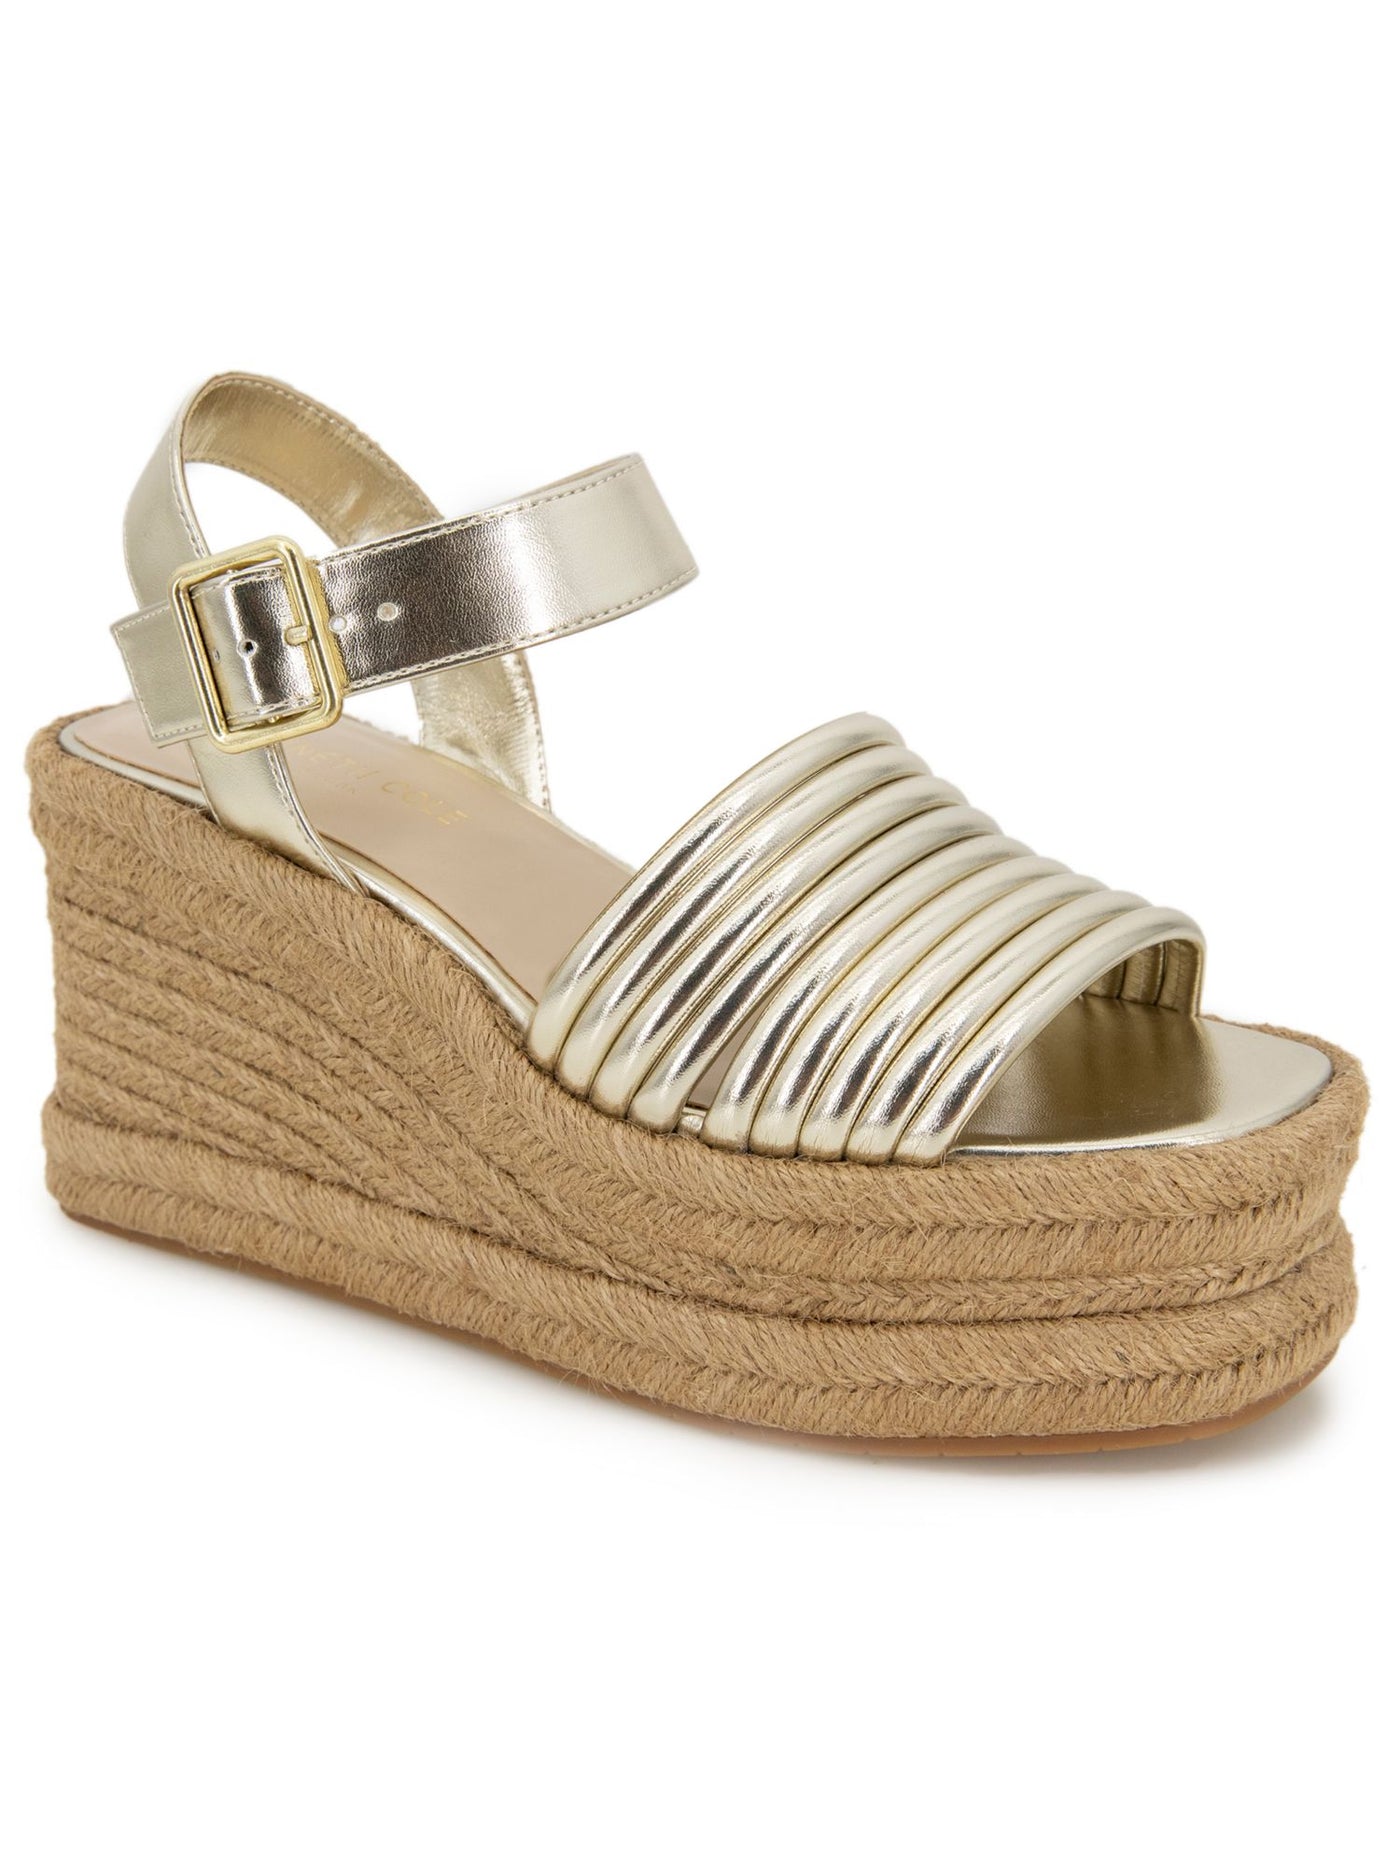 KENNETH COLE NEW YORK Womens Gold 2 Wedge Adjustable Ankle Strap Strappy Padded Shelby Open Toe Wedge Buckle Espadrille Shoes 8.5 M